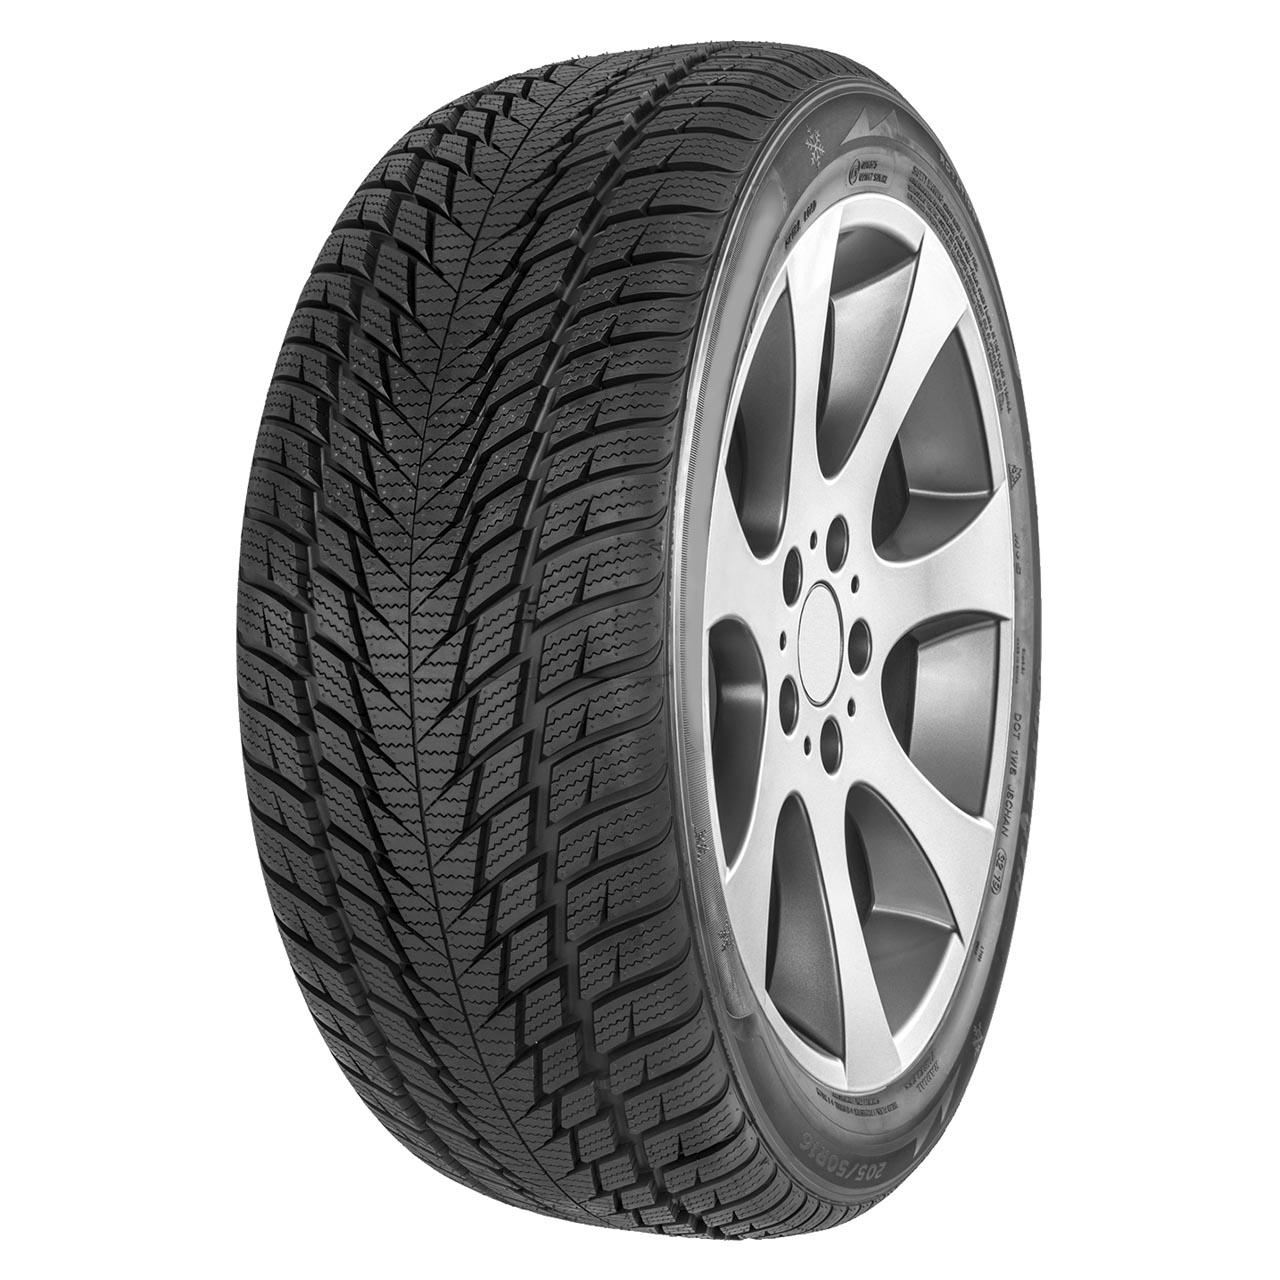 Gomme Nuove Fortuna 225/45 R18 95V GOWIN UHP2 XL M+S pneumatici nuovi Invernale